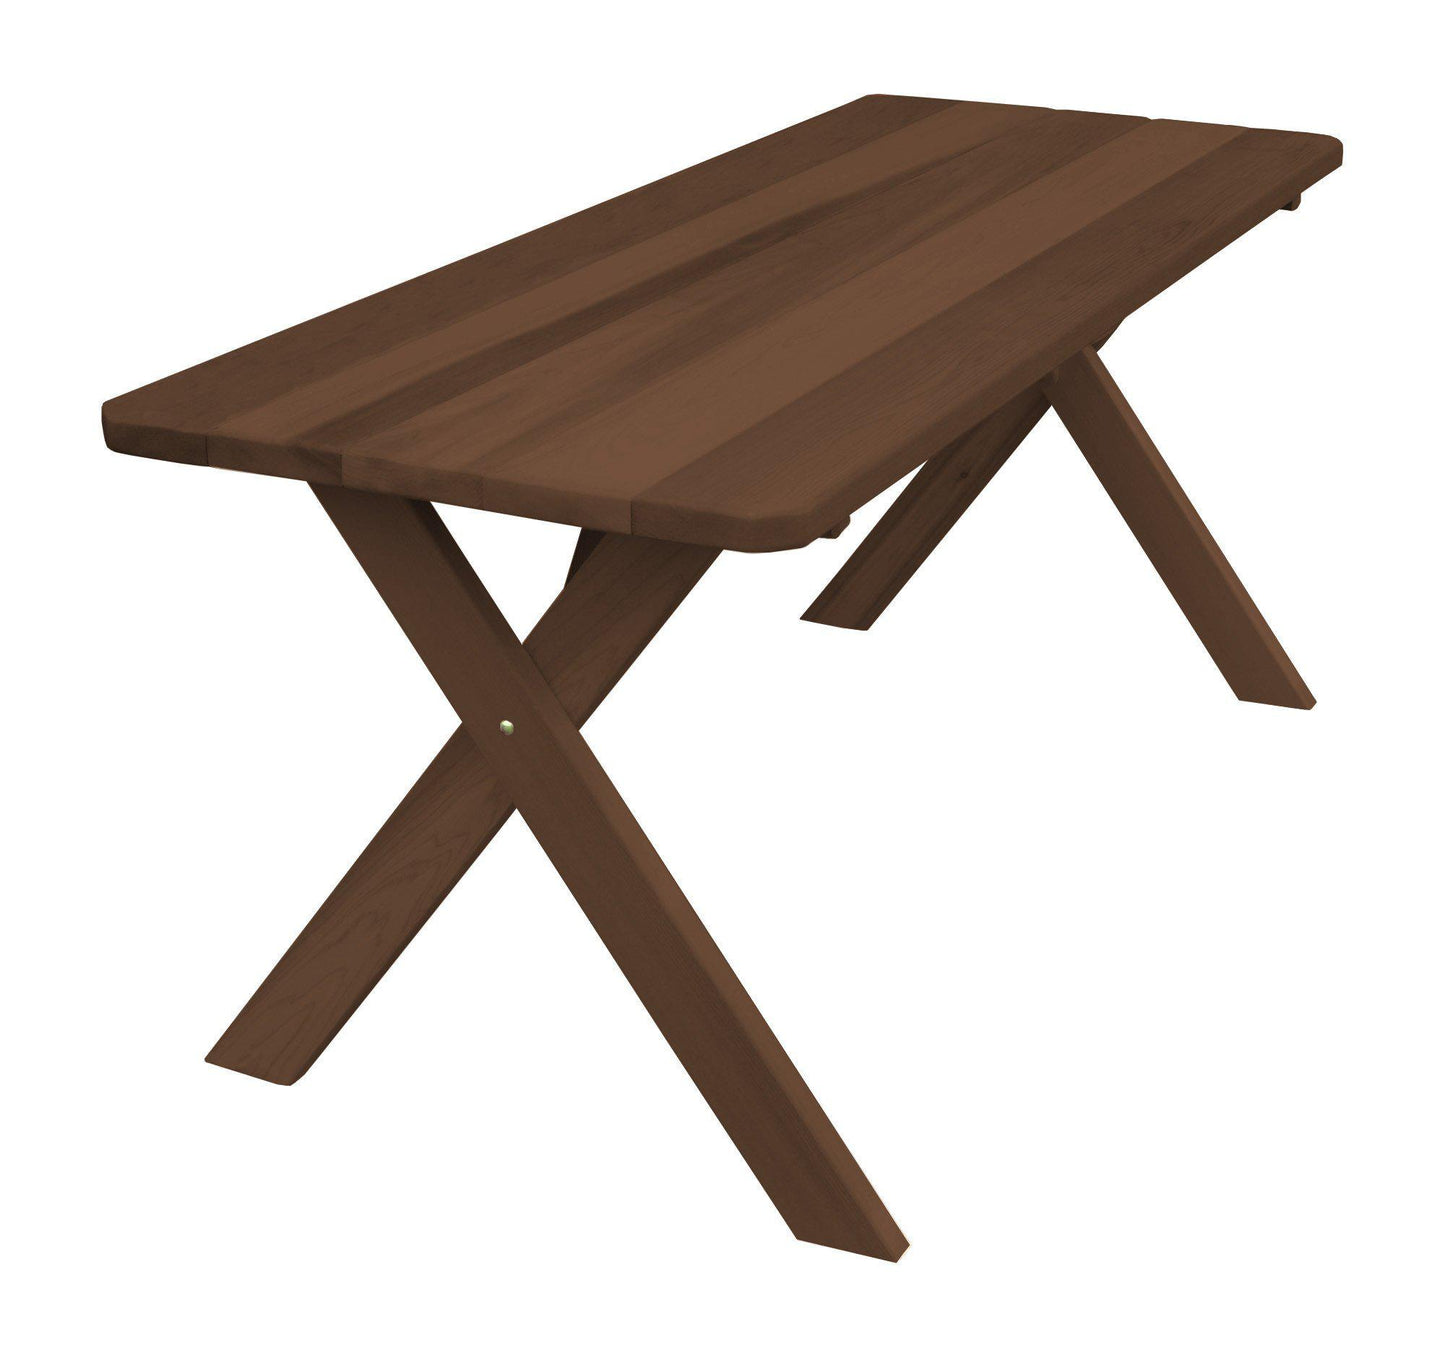 A&L FURNITURE CO.Western Red Cedar 94" Cross-leg Table Only - Specify for FREE 2" Umbrella Hole - LEAD TIME TO SHIP 4 WEEKS OR LESS